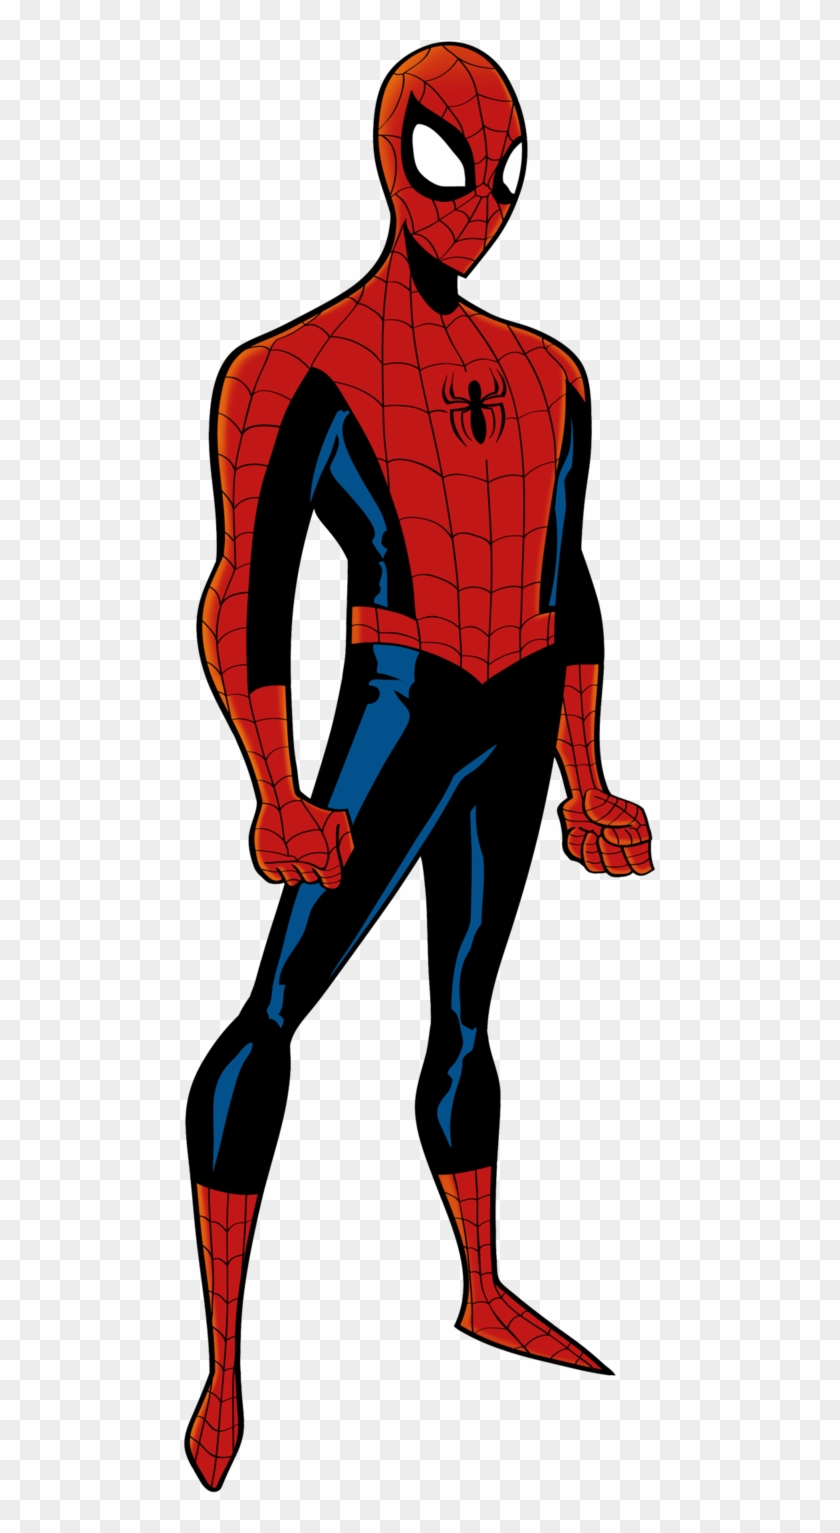 In5an1ty 345 54 Spider-man By Dawidarte - Steve Ditko Spider Man Png #638884